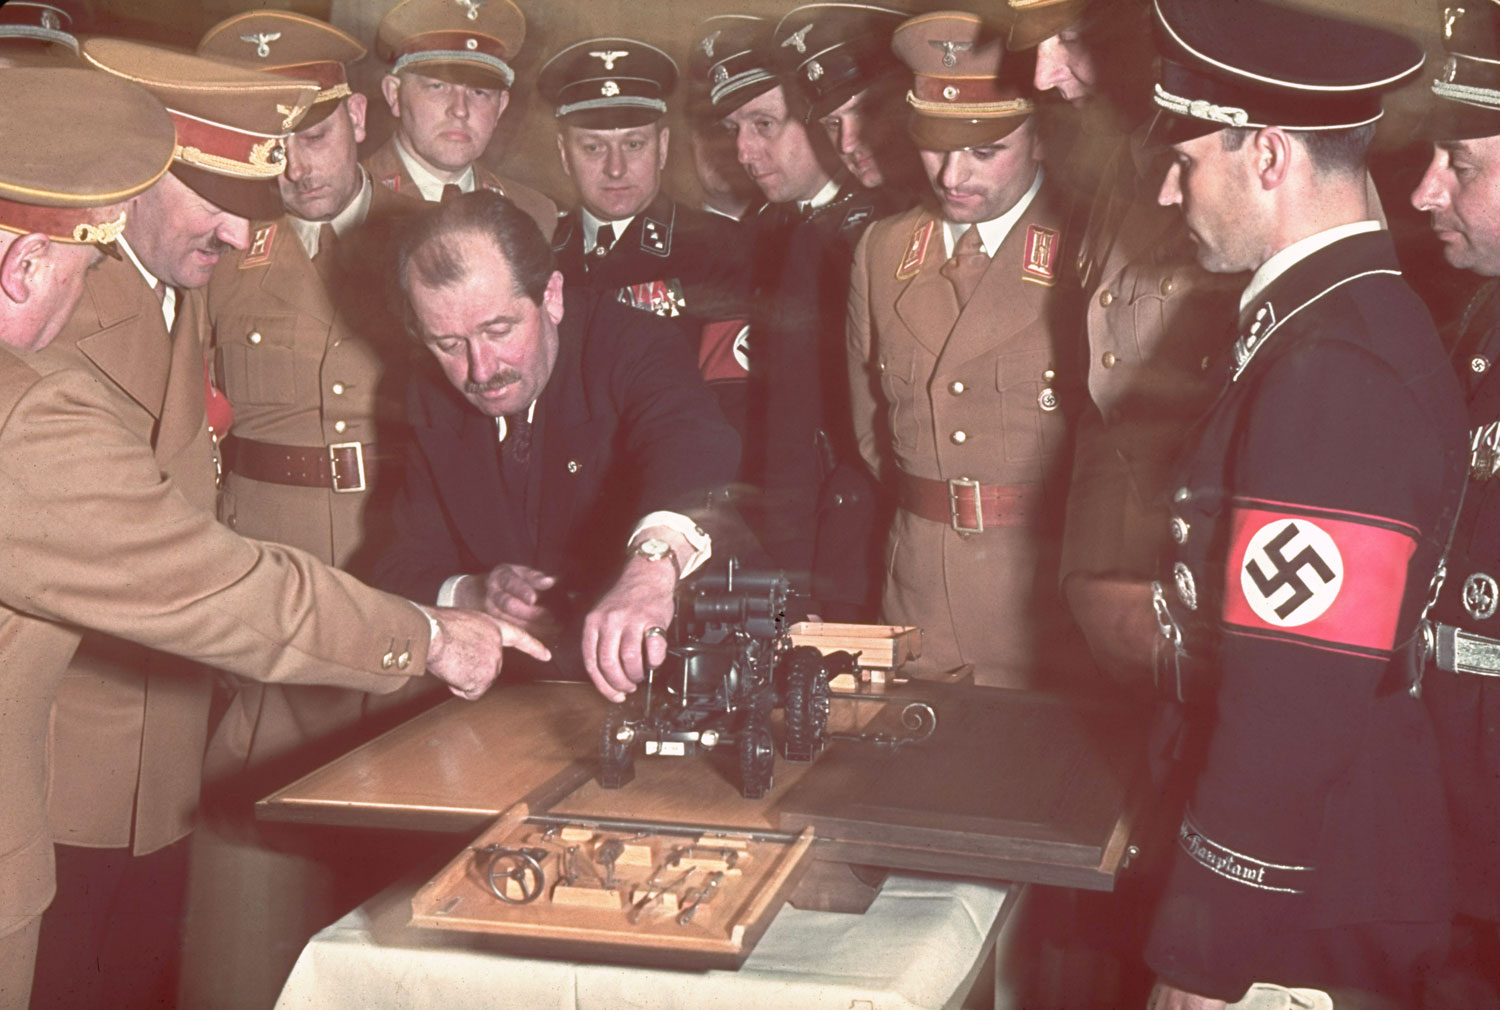 The automobile engineer and designer Ferdinand Porsche (in suit) presents Adolf Hitler with a model car during celebrations for Hitler's 50th birthday, Berlin, April 1939.